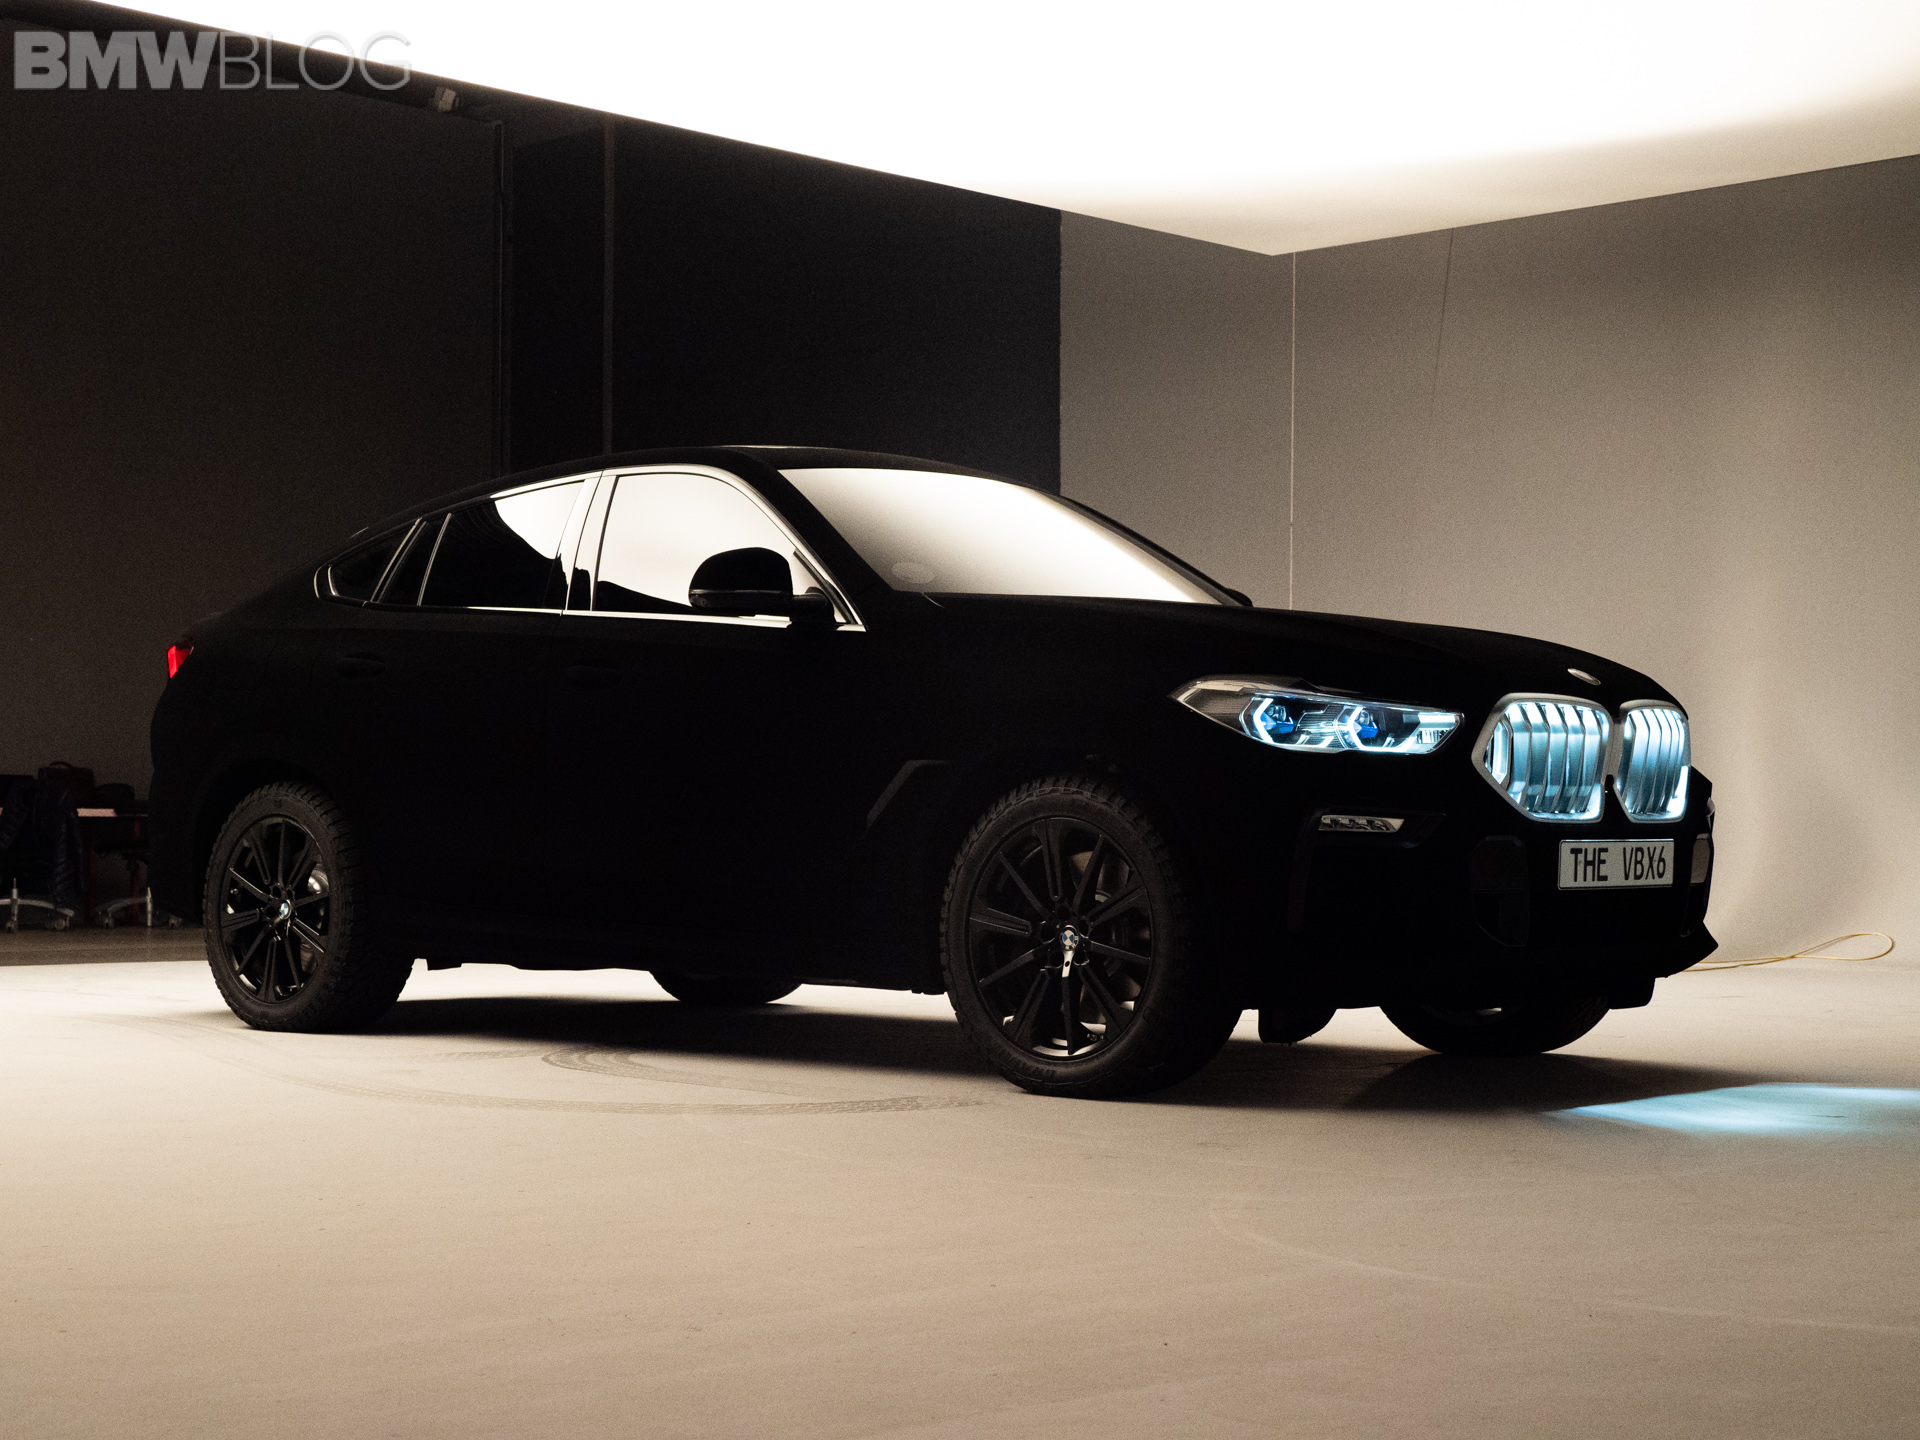 A Final Look At The Bmw X6 Vantablack The Darkest Color In The World